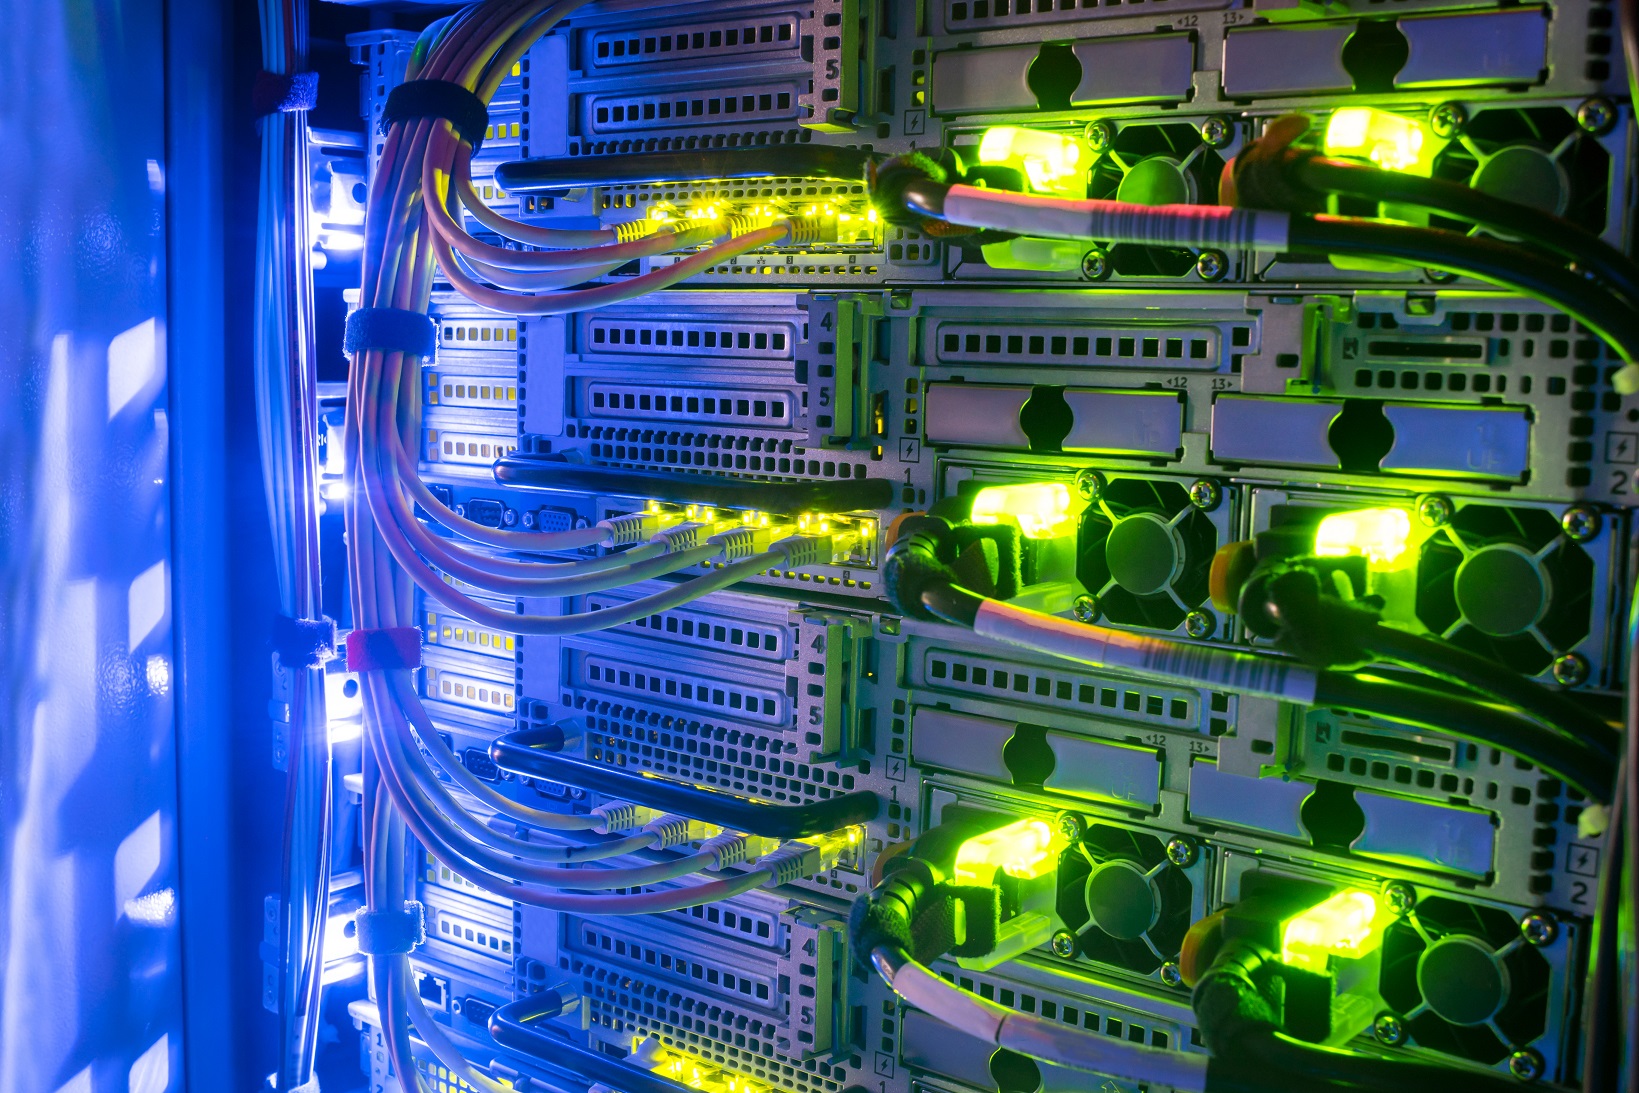 Racks with server equipment are in the dark room of the data center. Colorful indication of the network interests of the Internet router. Information Technology Concept.